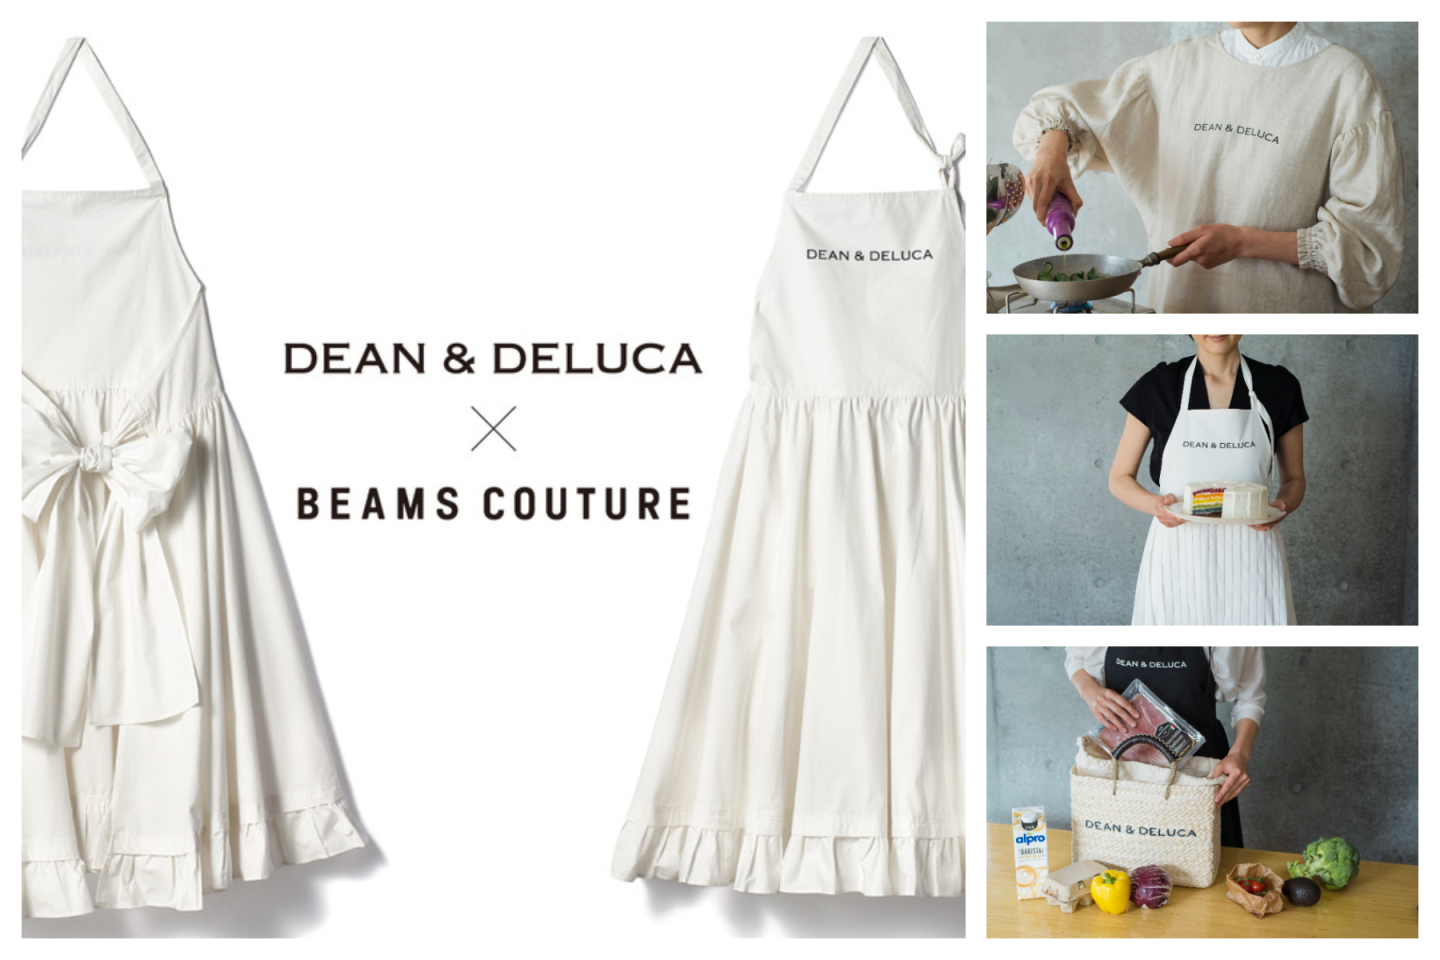 DEAN＆DELUCAとBEAMS COUTUREが初のコラボ！エプロンや保冷バッグなどを発売